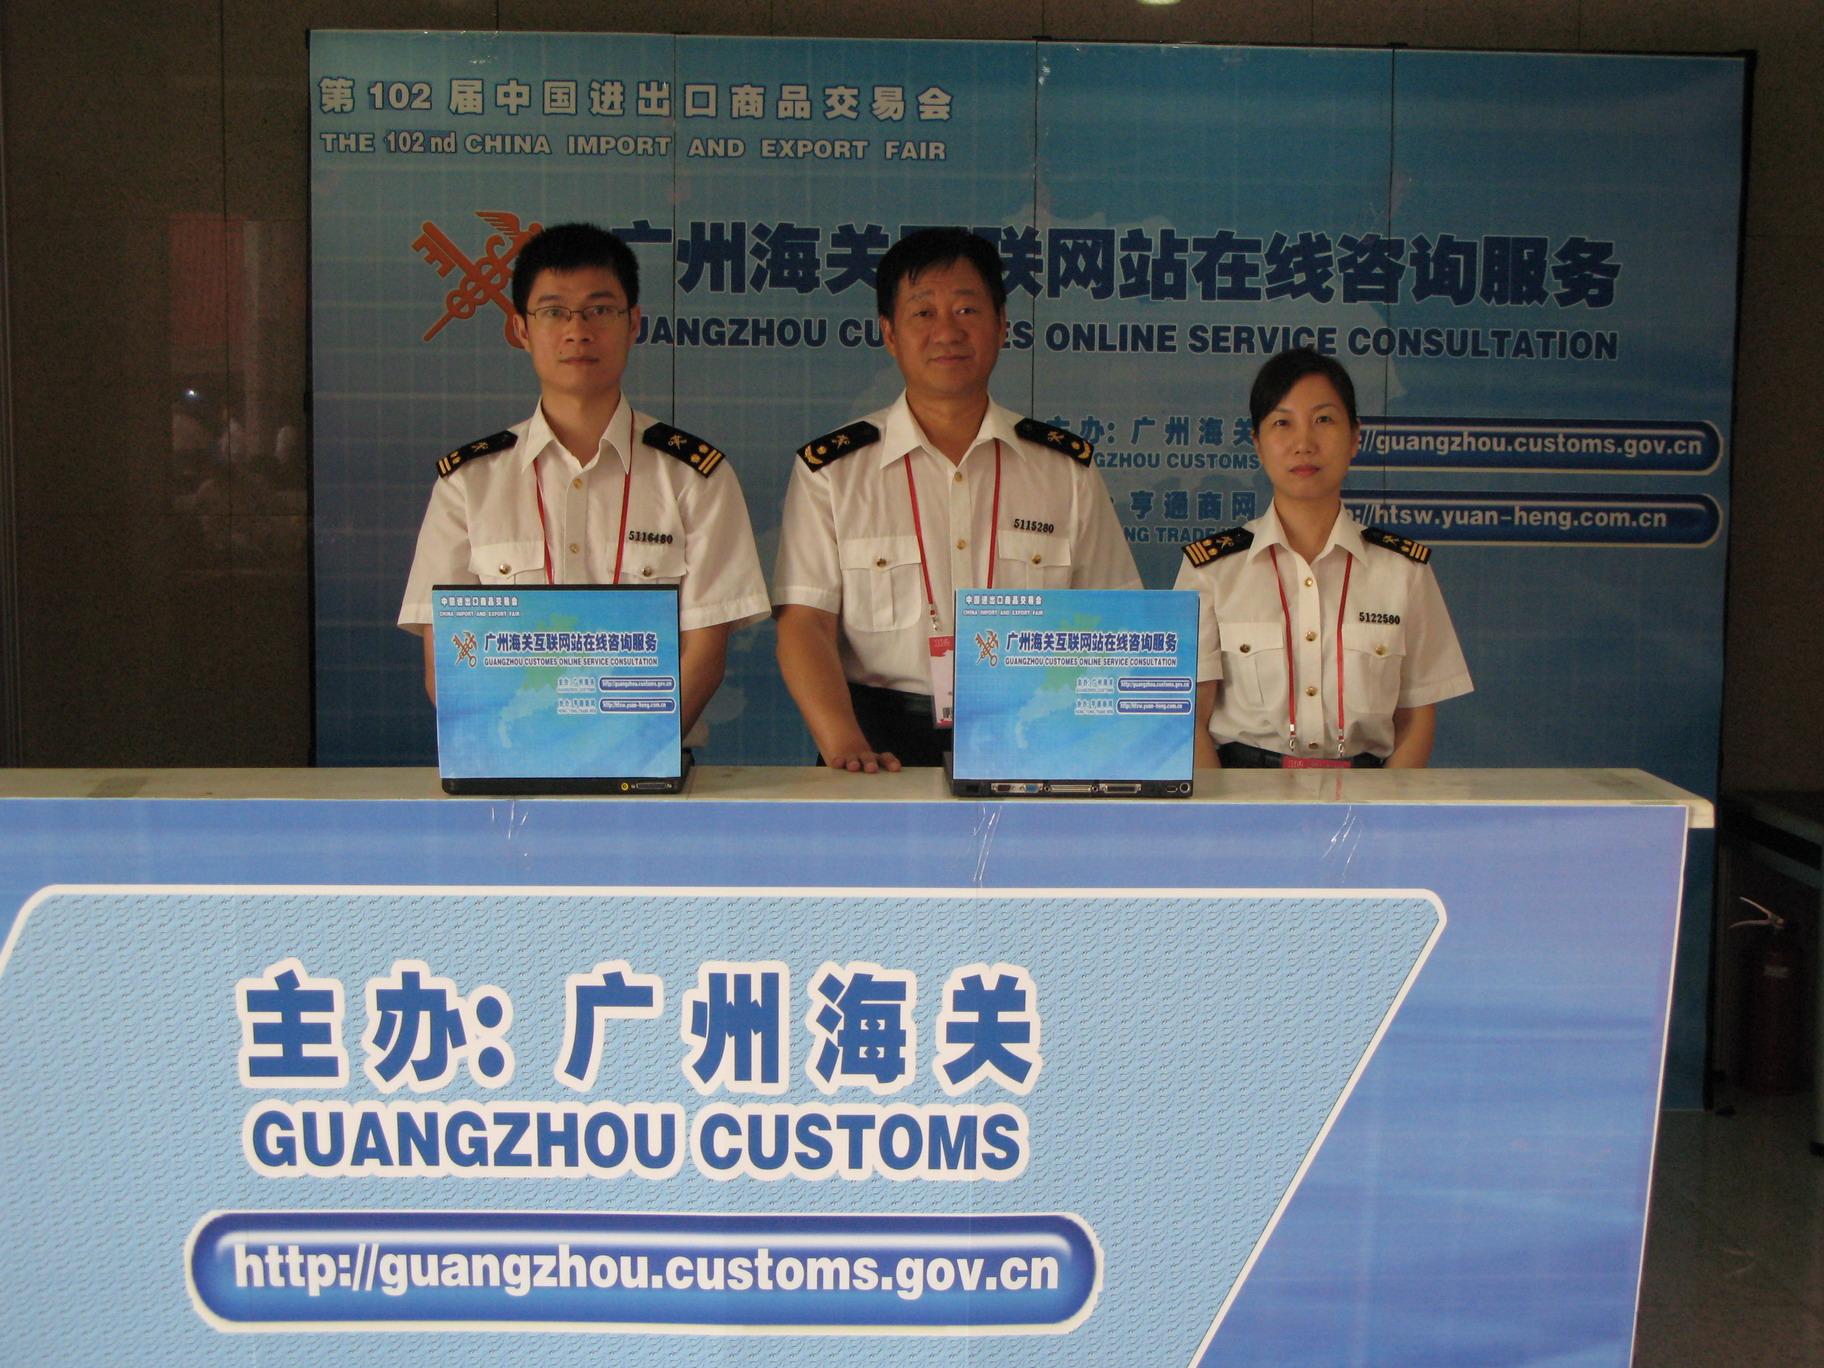 The Area of International Pavilion of the Canton Fair Doubled and High-Quality Services Provided by Customs Were Praised